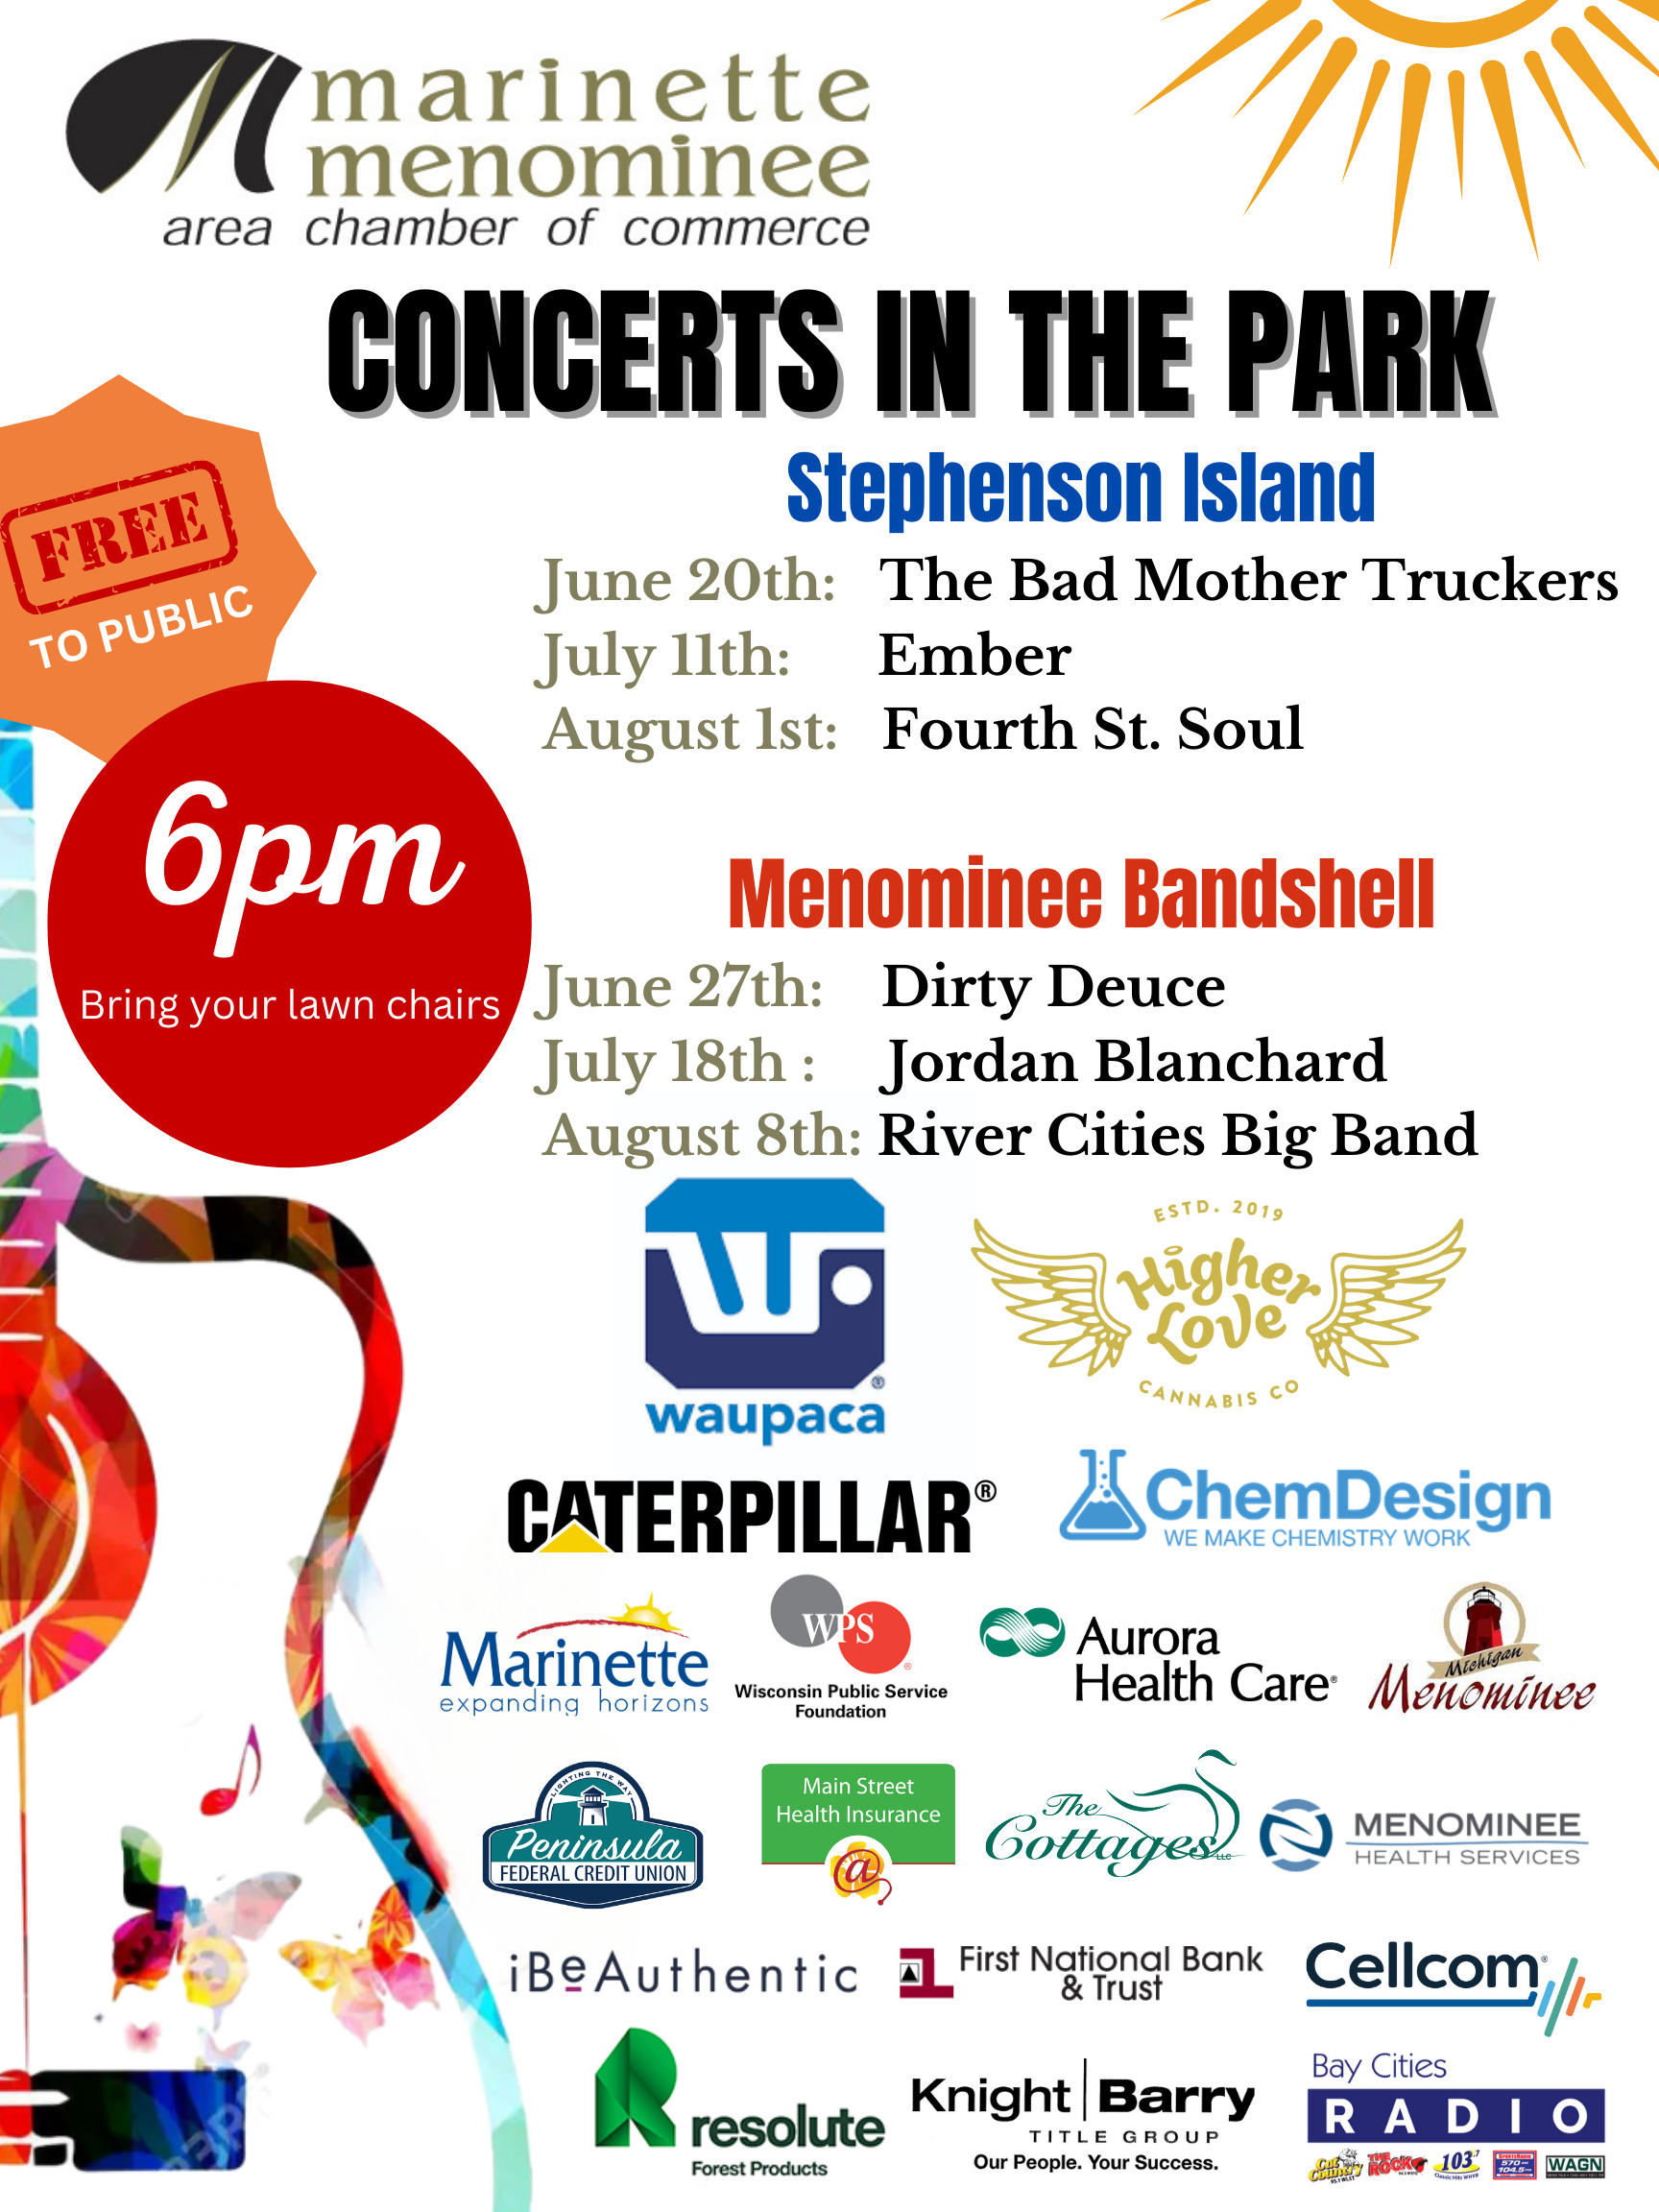 CONCERTS IN THE PARK POSTER